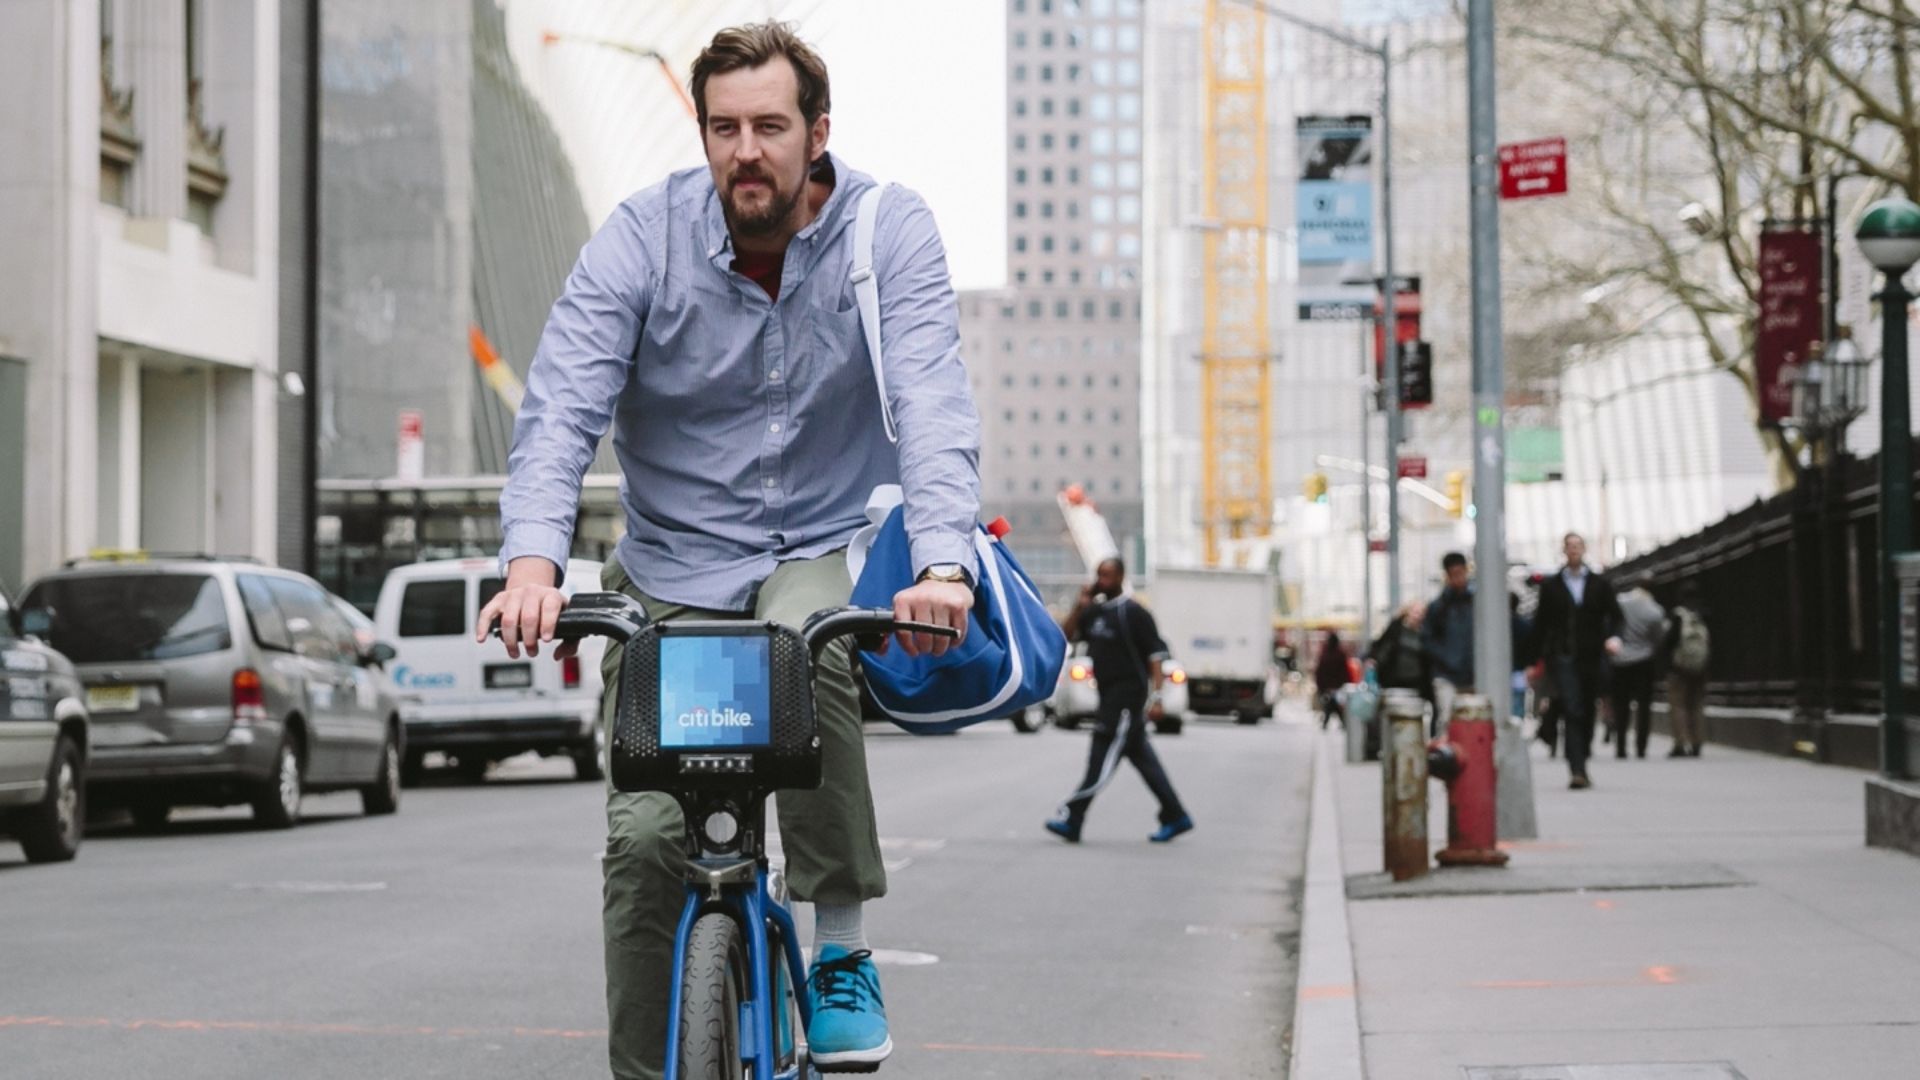 Miguel Wework On A Bicycle With A Blue Bag